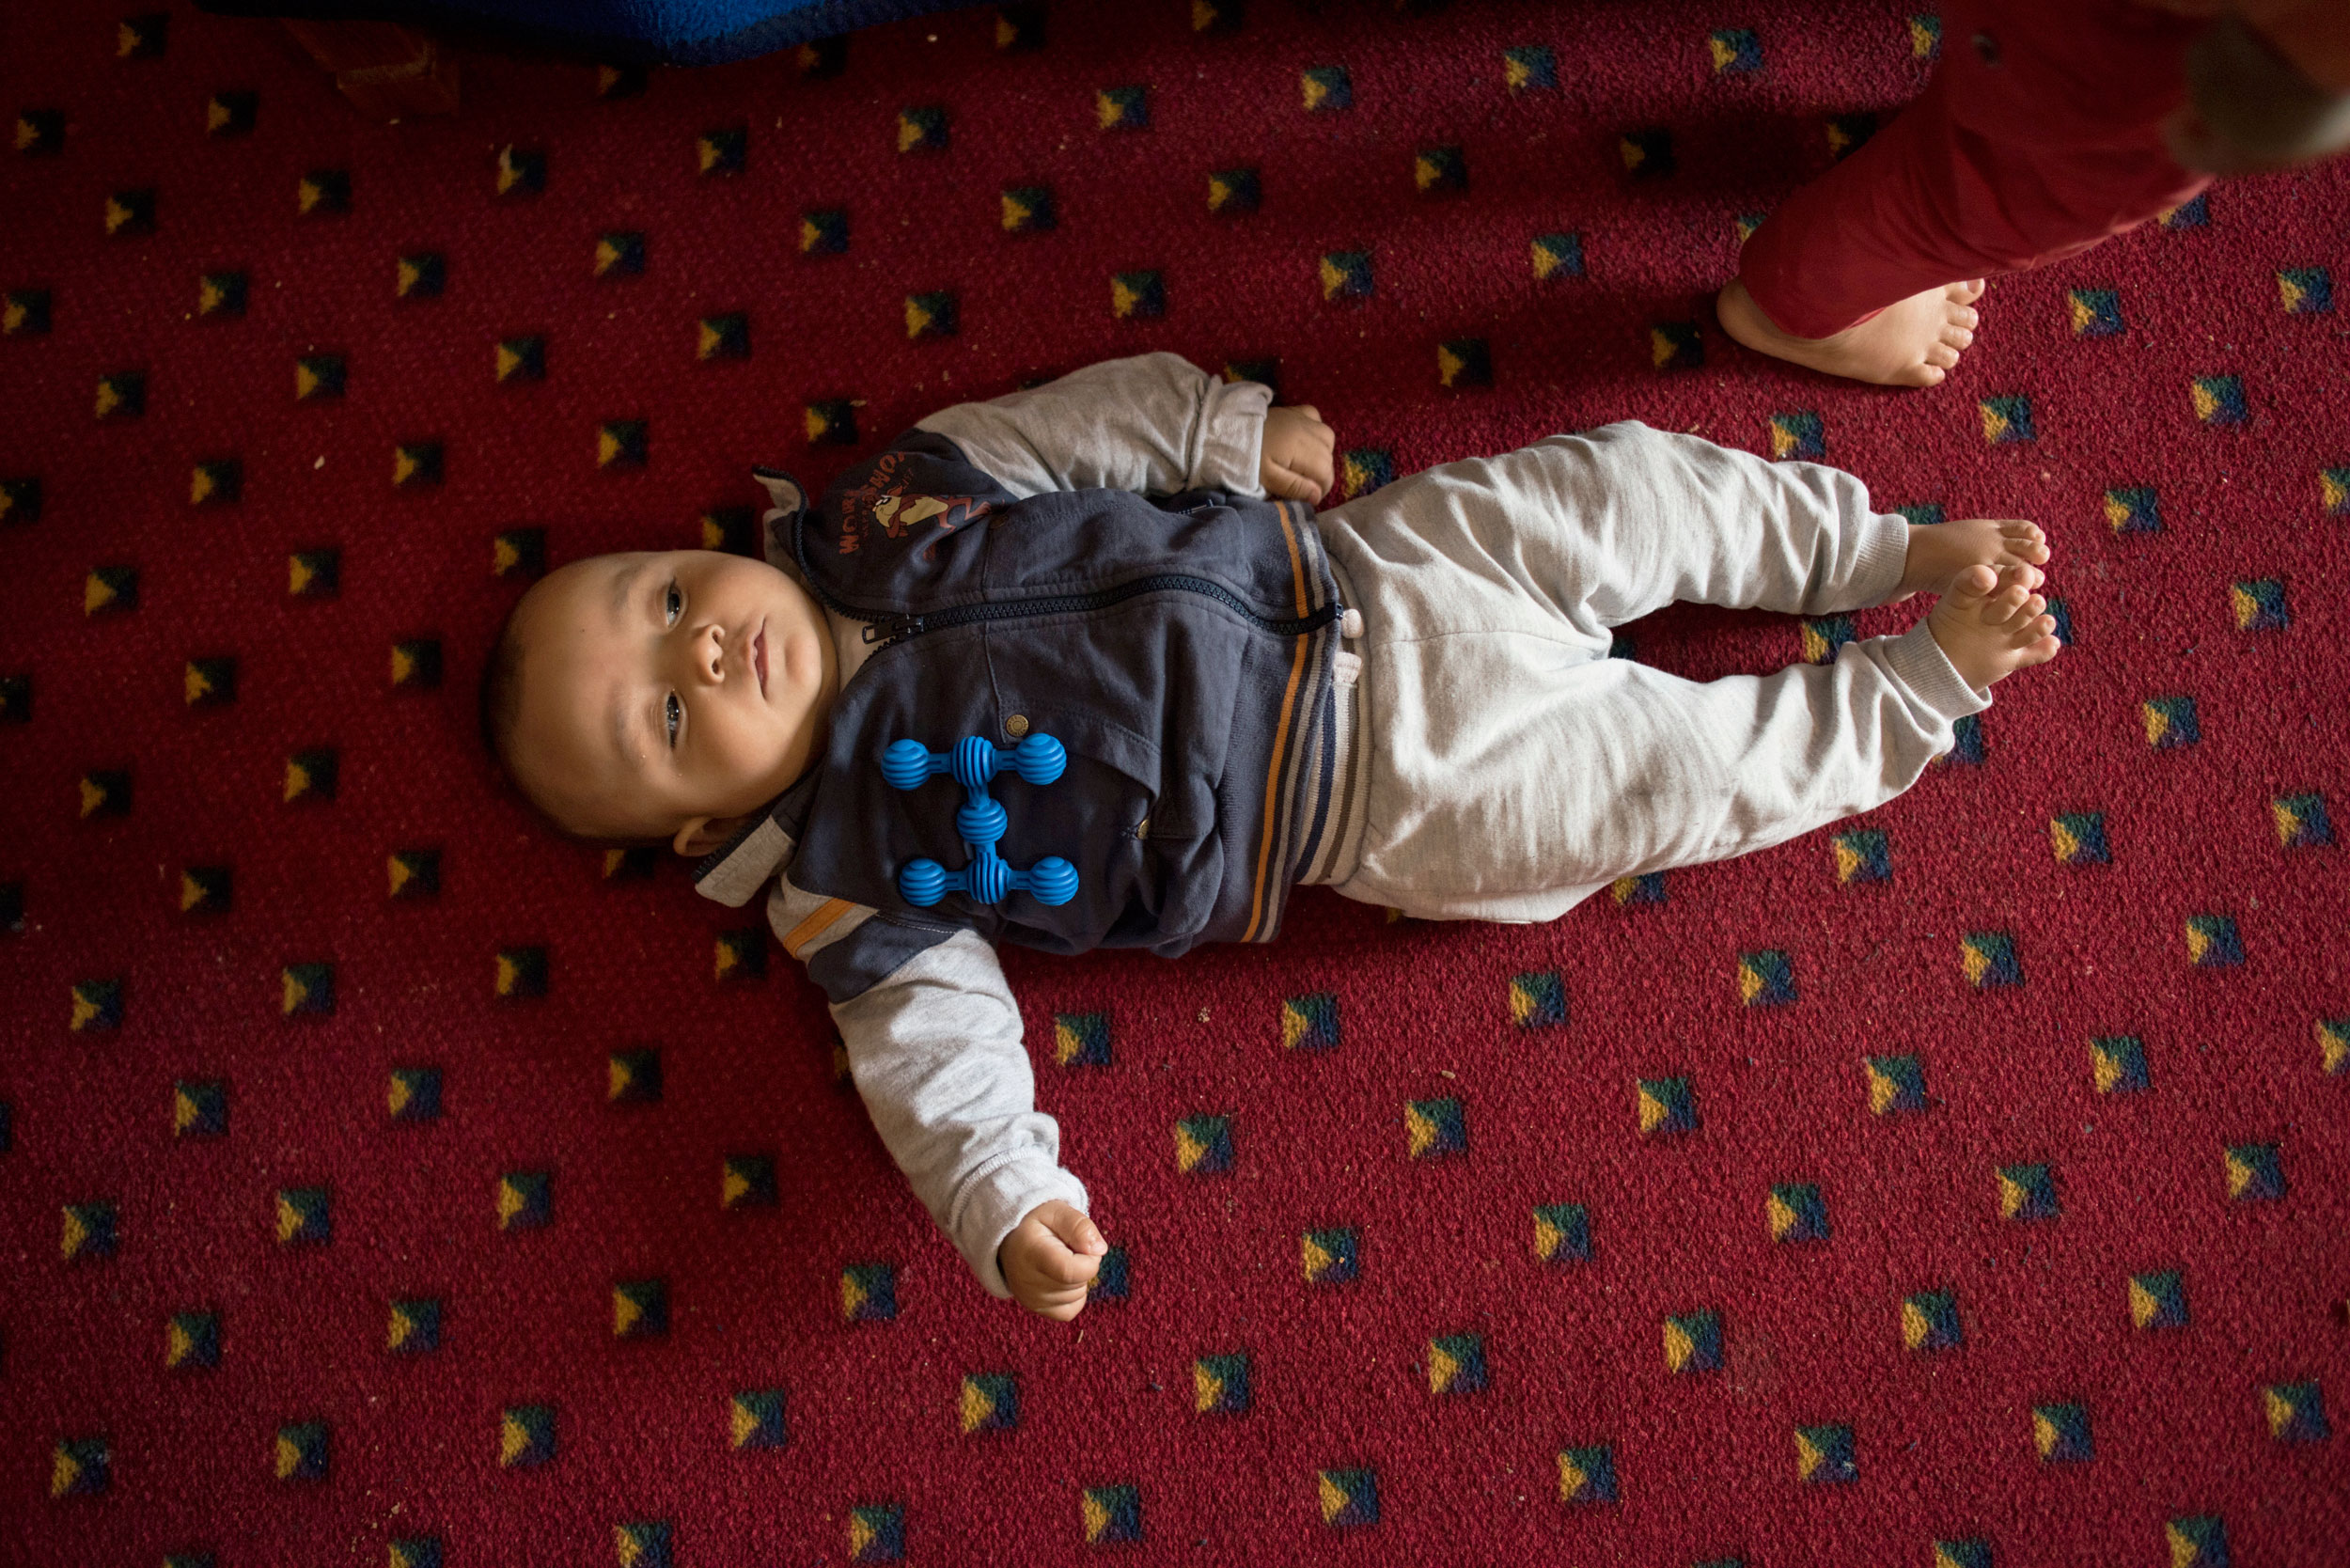 Faraj, who was born in a Greek refugee camp in October, rests after trying to learn to roll over (Lynsey Addario—Verbatim for TIME)